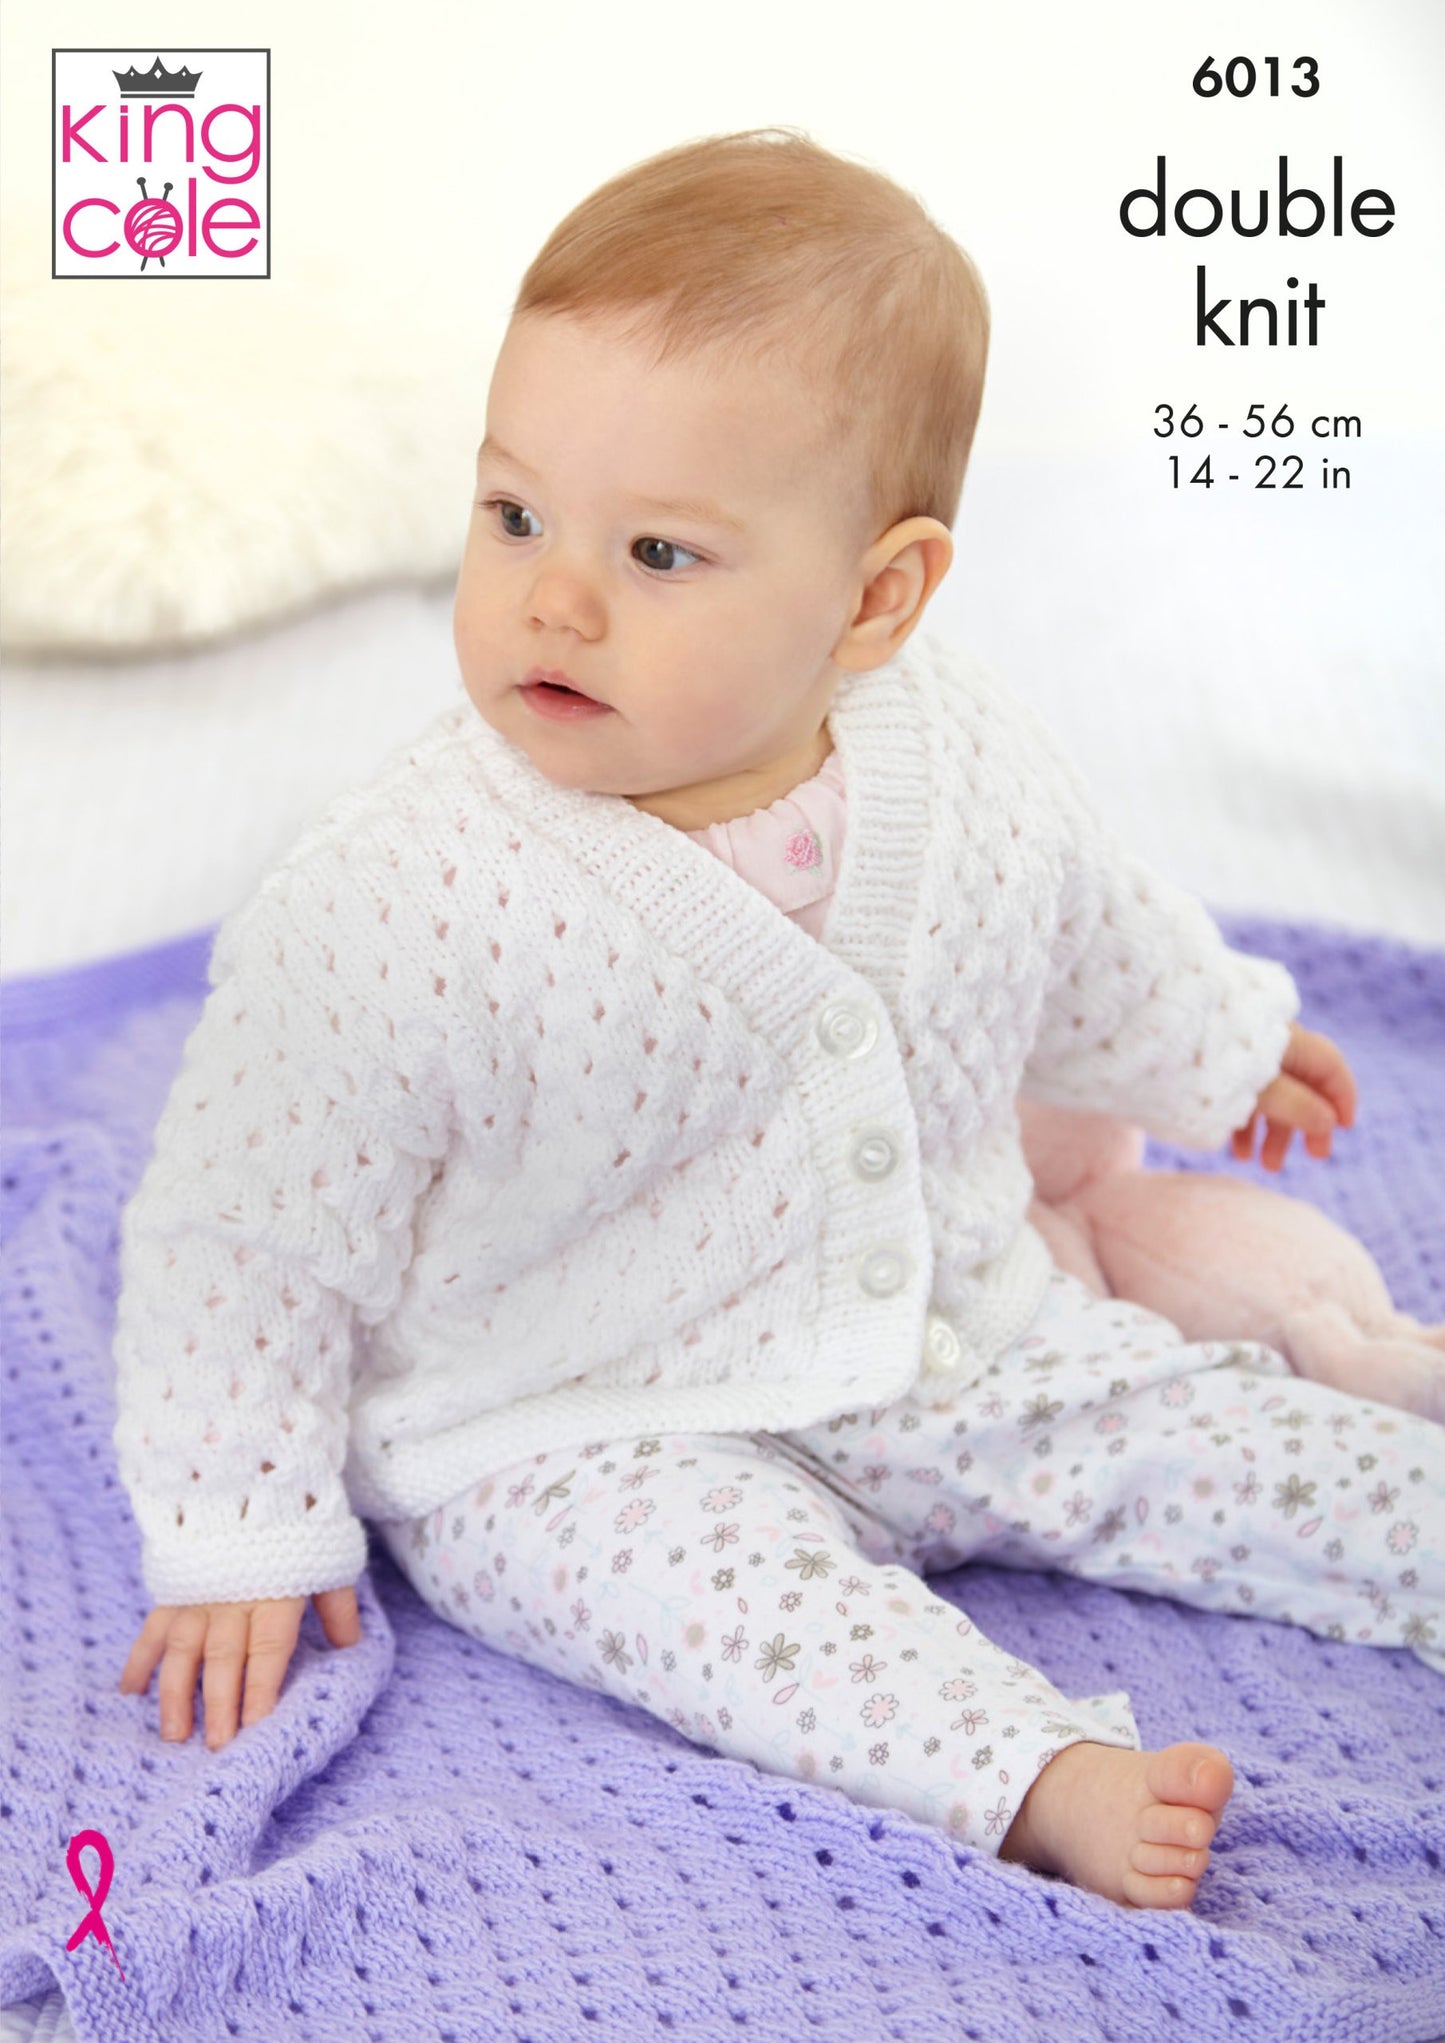 Knitting Pattern 6013 - Cardigans and Blanket in King Cole Comfort Baby DK